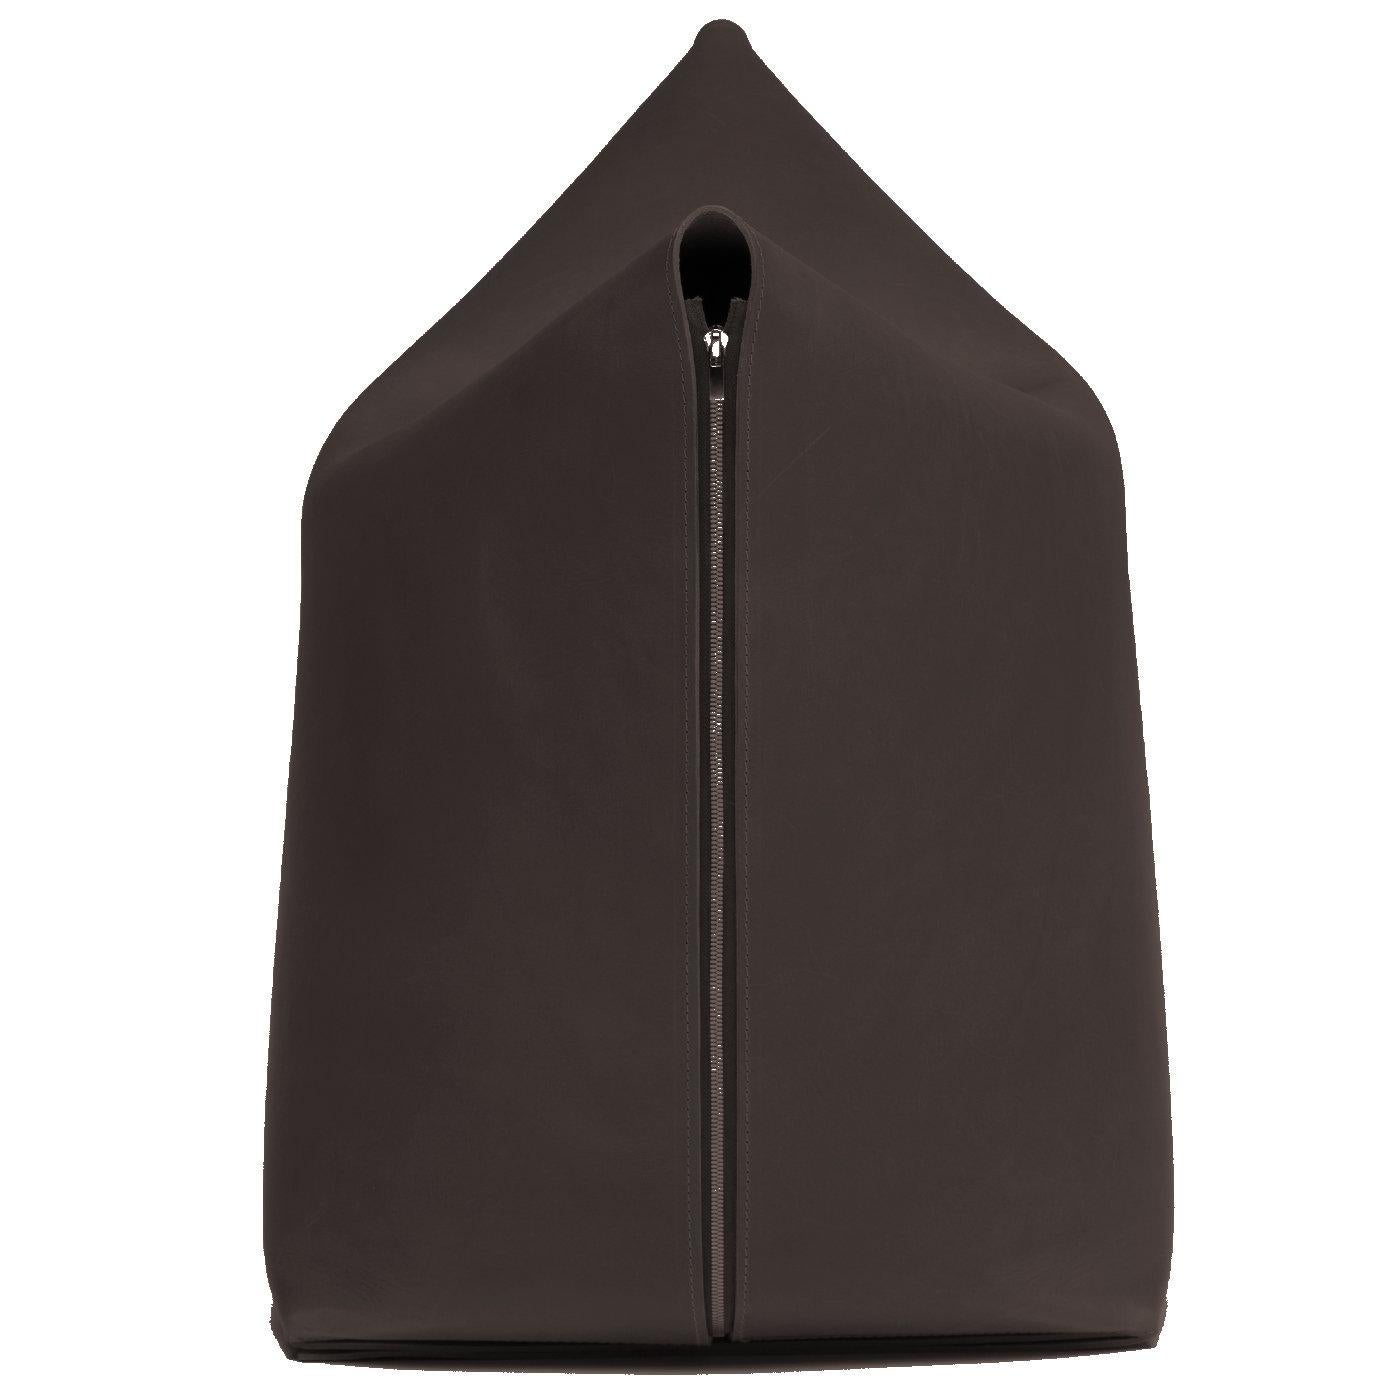 This refined beanbag chair is wrapped carefully in a single piece of dark brown leather, its folds resembling those of origami. The chair, taking on the shape of the face of a cat, makes for a very comfortable place to sit.